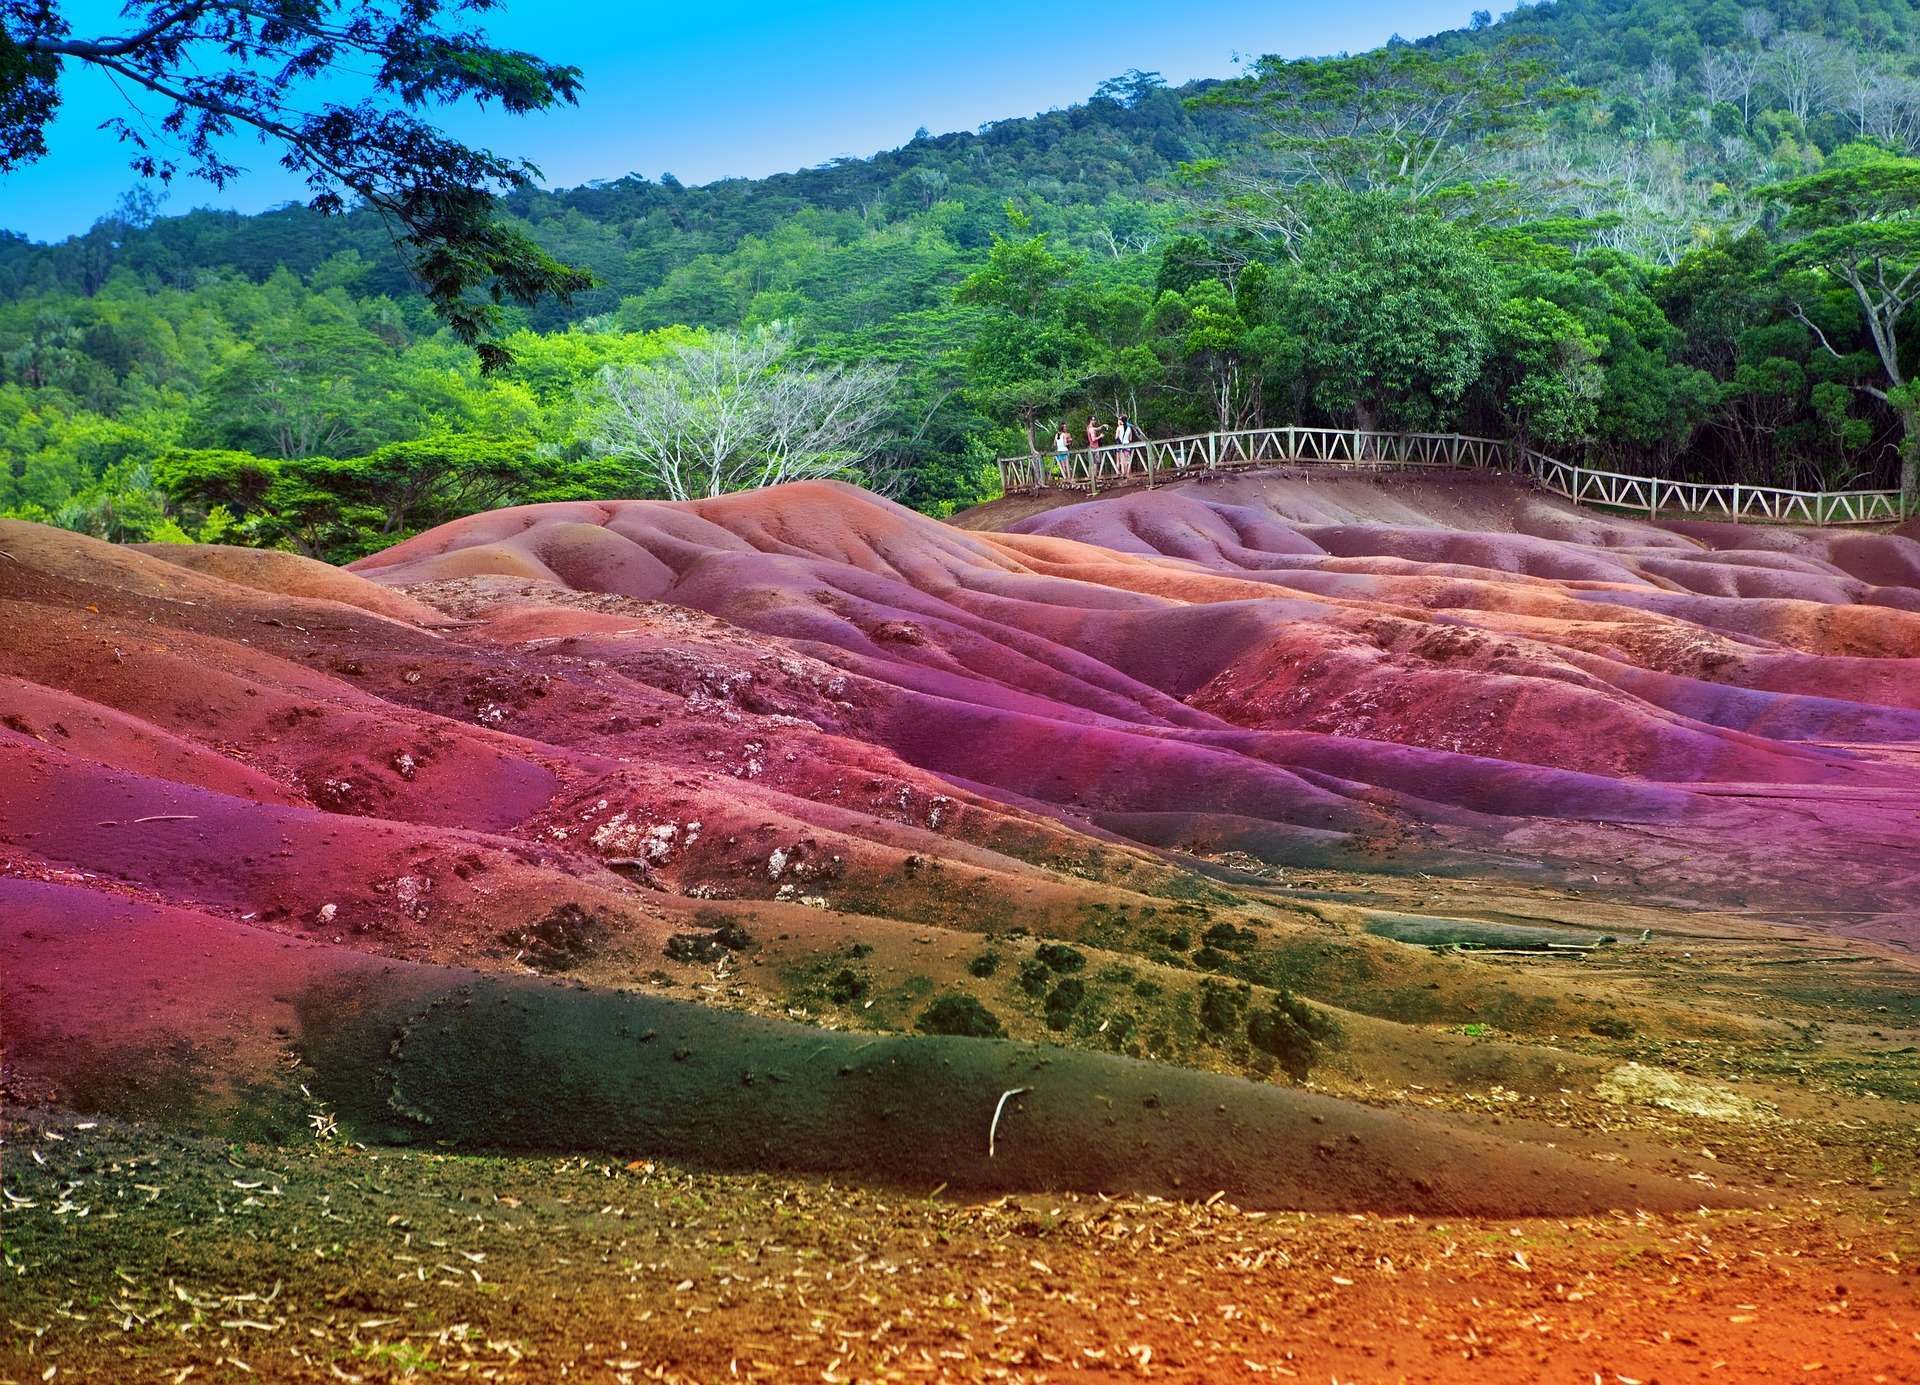 People are looking at the Seven coloured earth of Chamarel